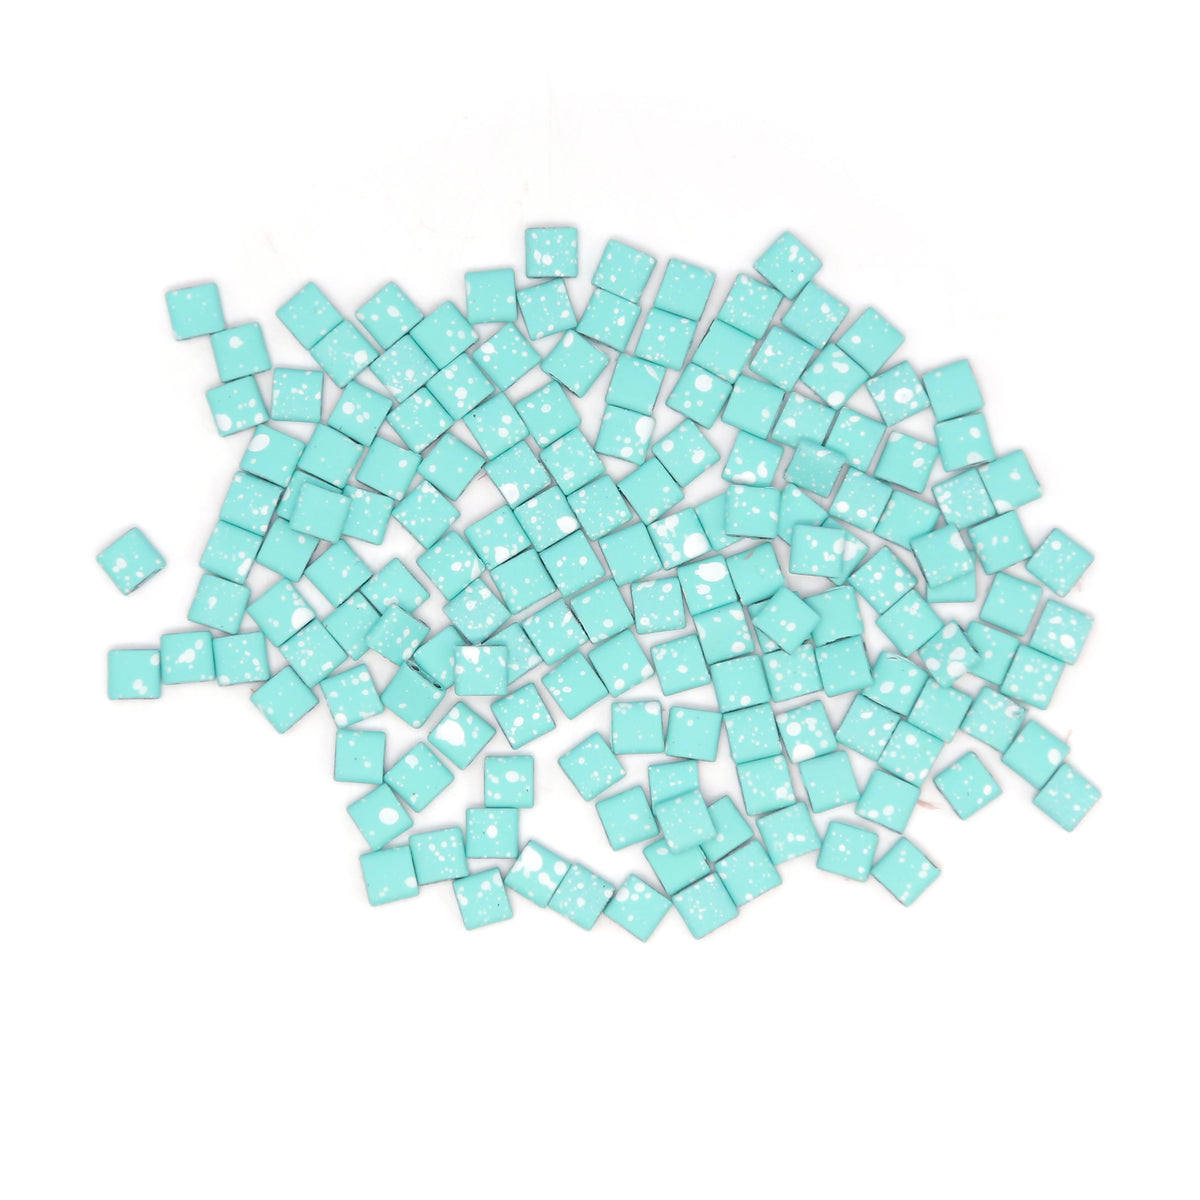 Salted Jungala - Whole Tile Beads